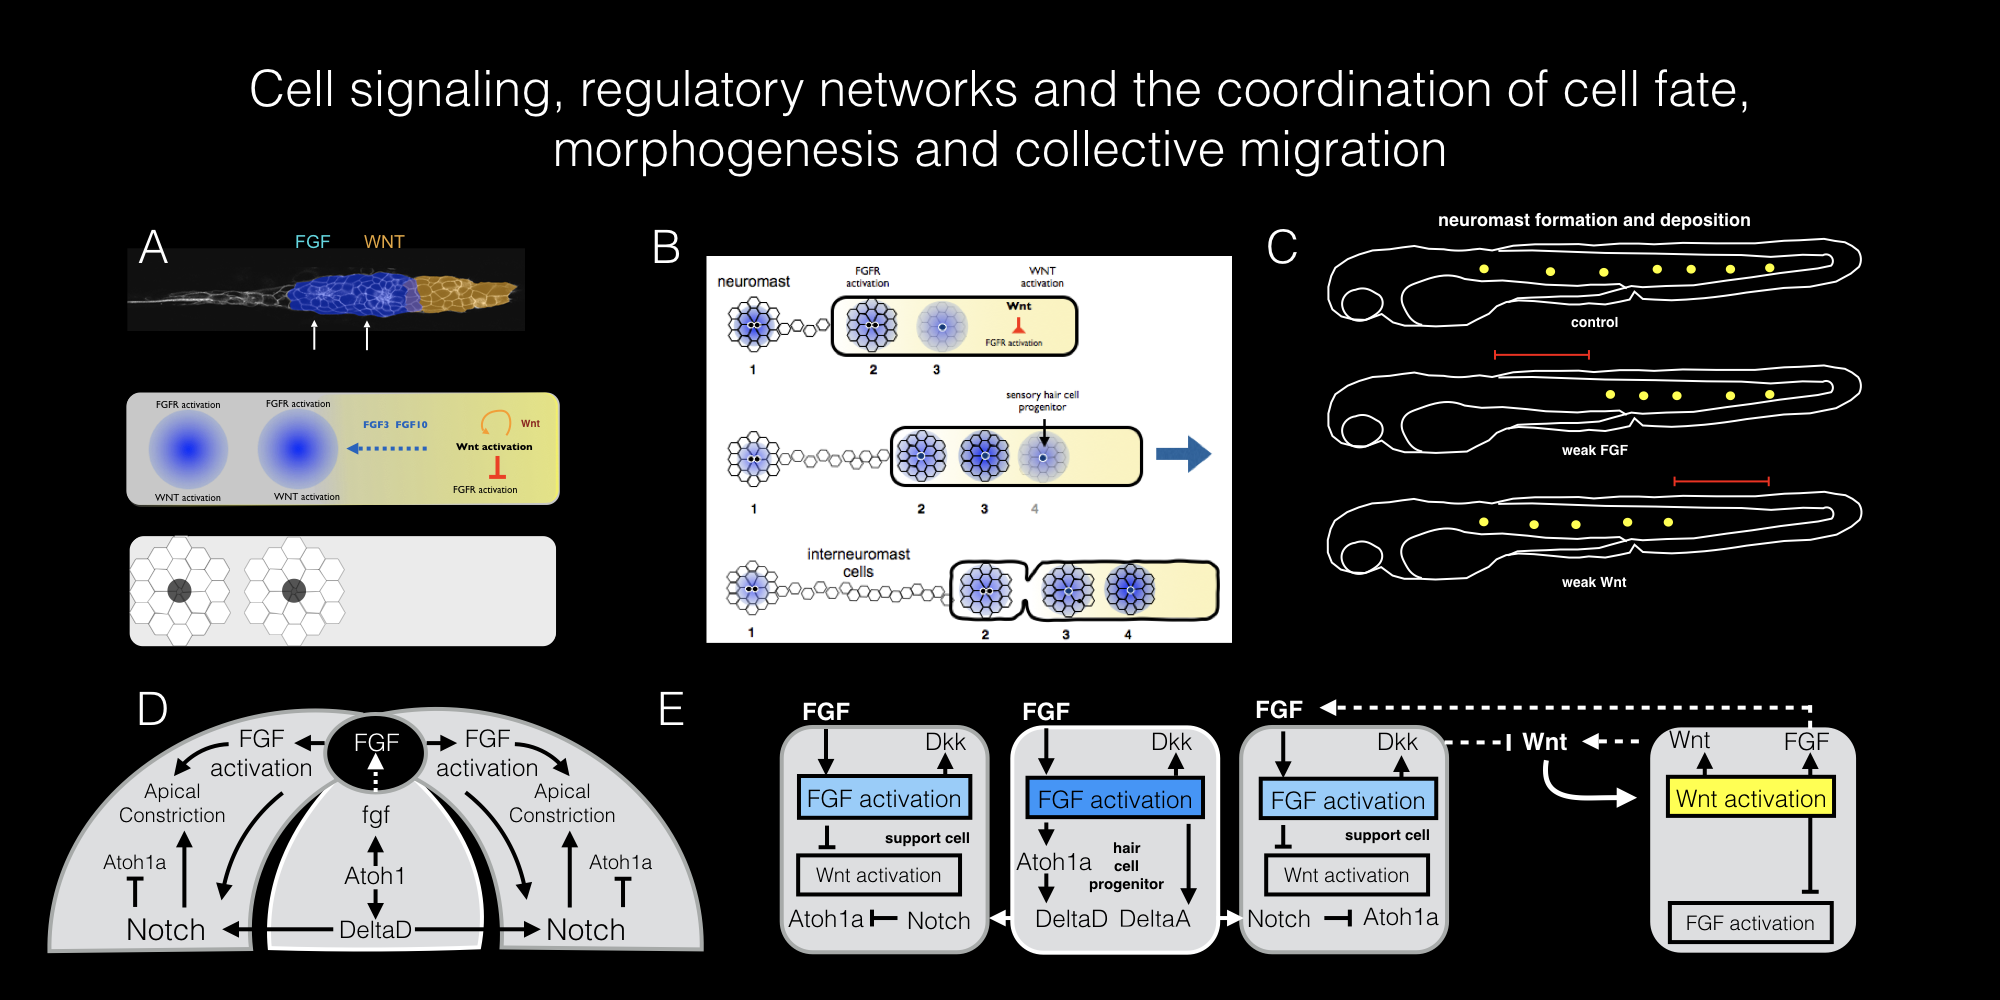 Schematics of regulatory networks. A. Basic Wnt FGF regulatory network. B. Sequential formation and deposition of neuromasts. C. Changes in deposition pattern following changes in Wnt and FGF signaling. D. Regulatory network in epithelial rosettes. E. Regulatory network that specifies sensory hair cell progenitor.